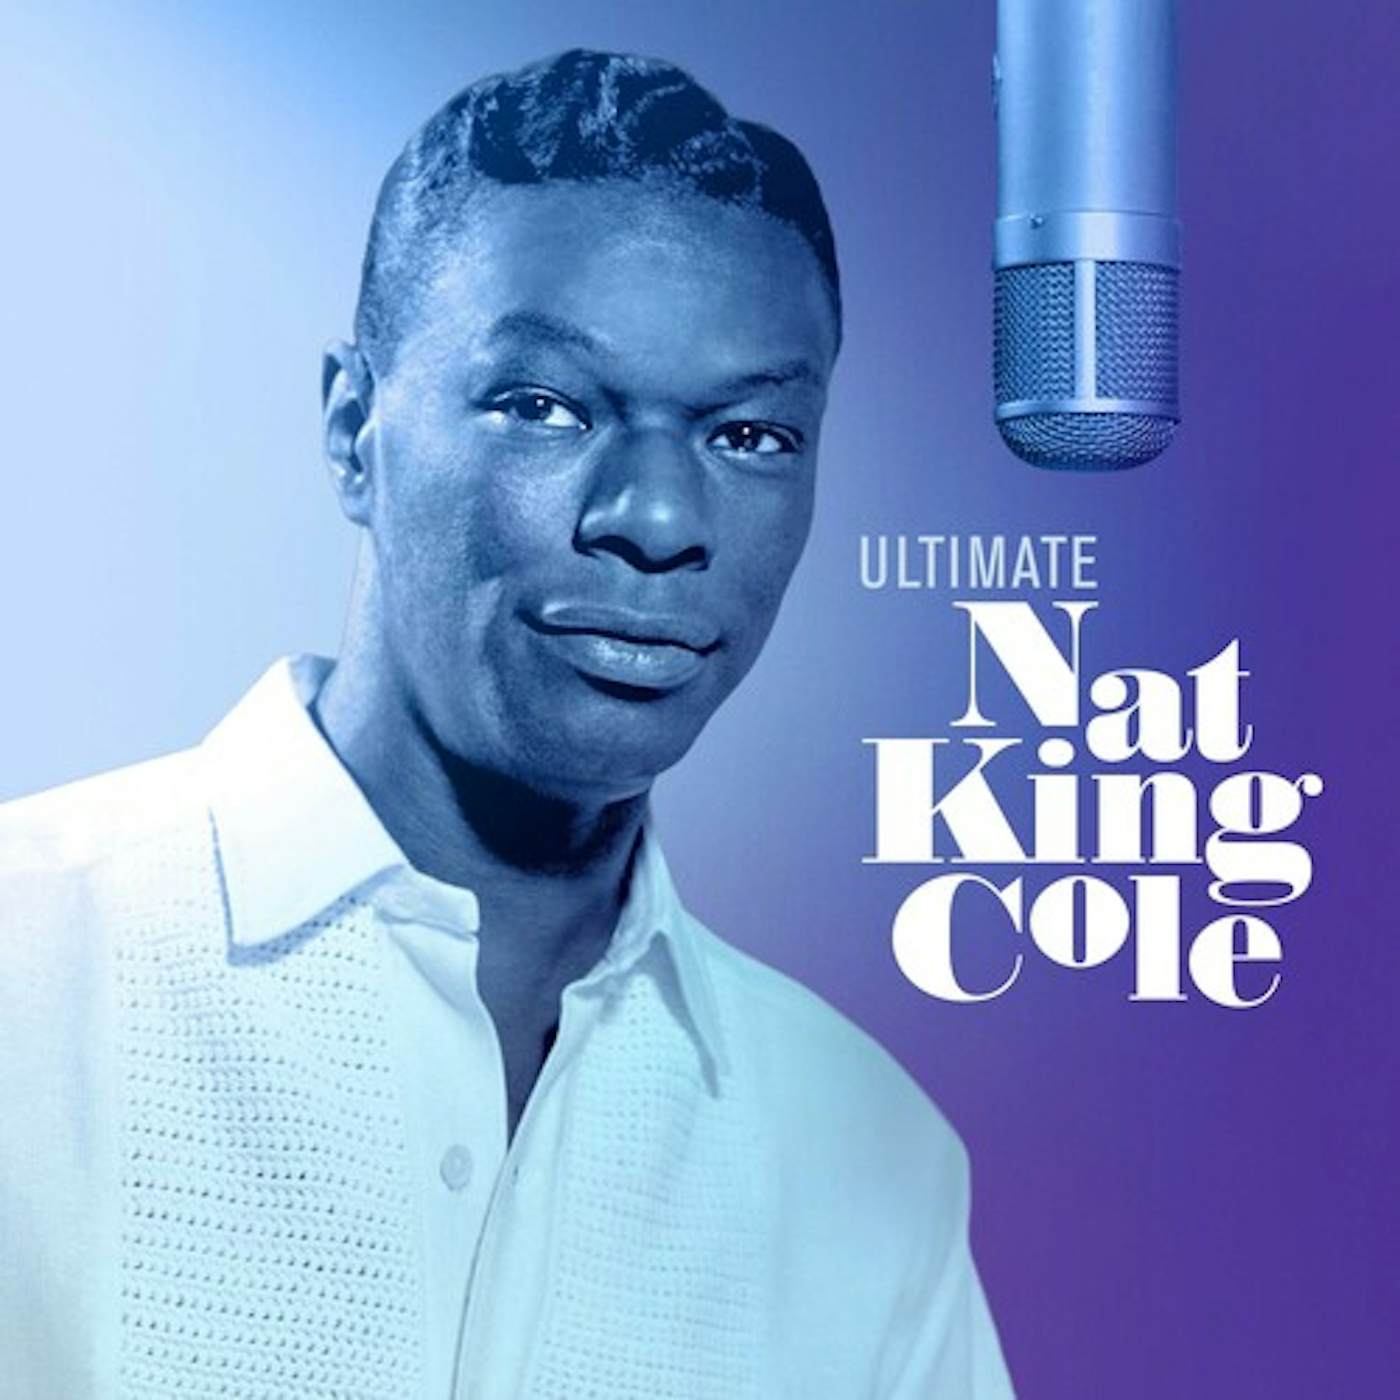 Ultimate Nat King Cole Vinyl Record